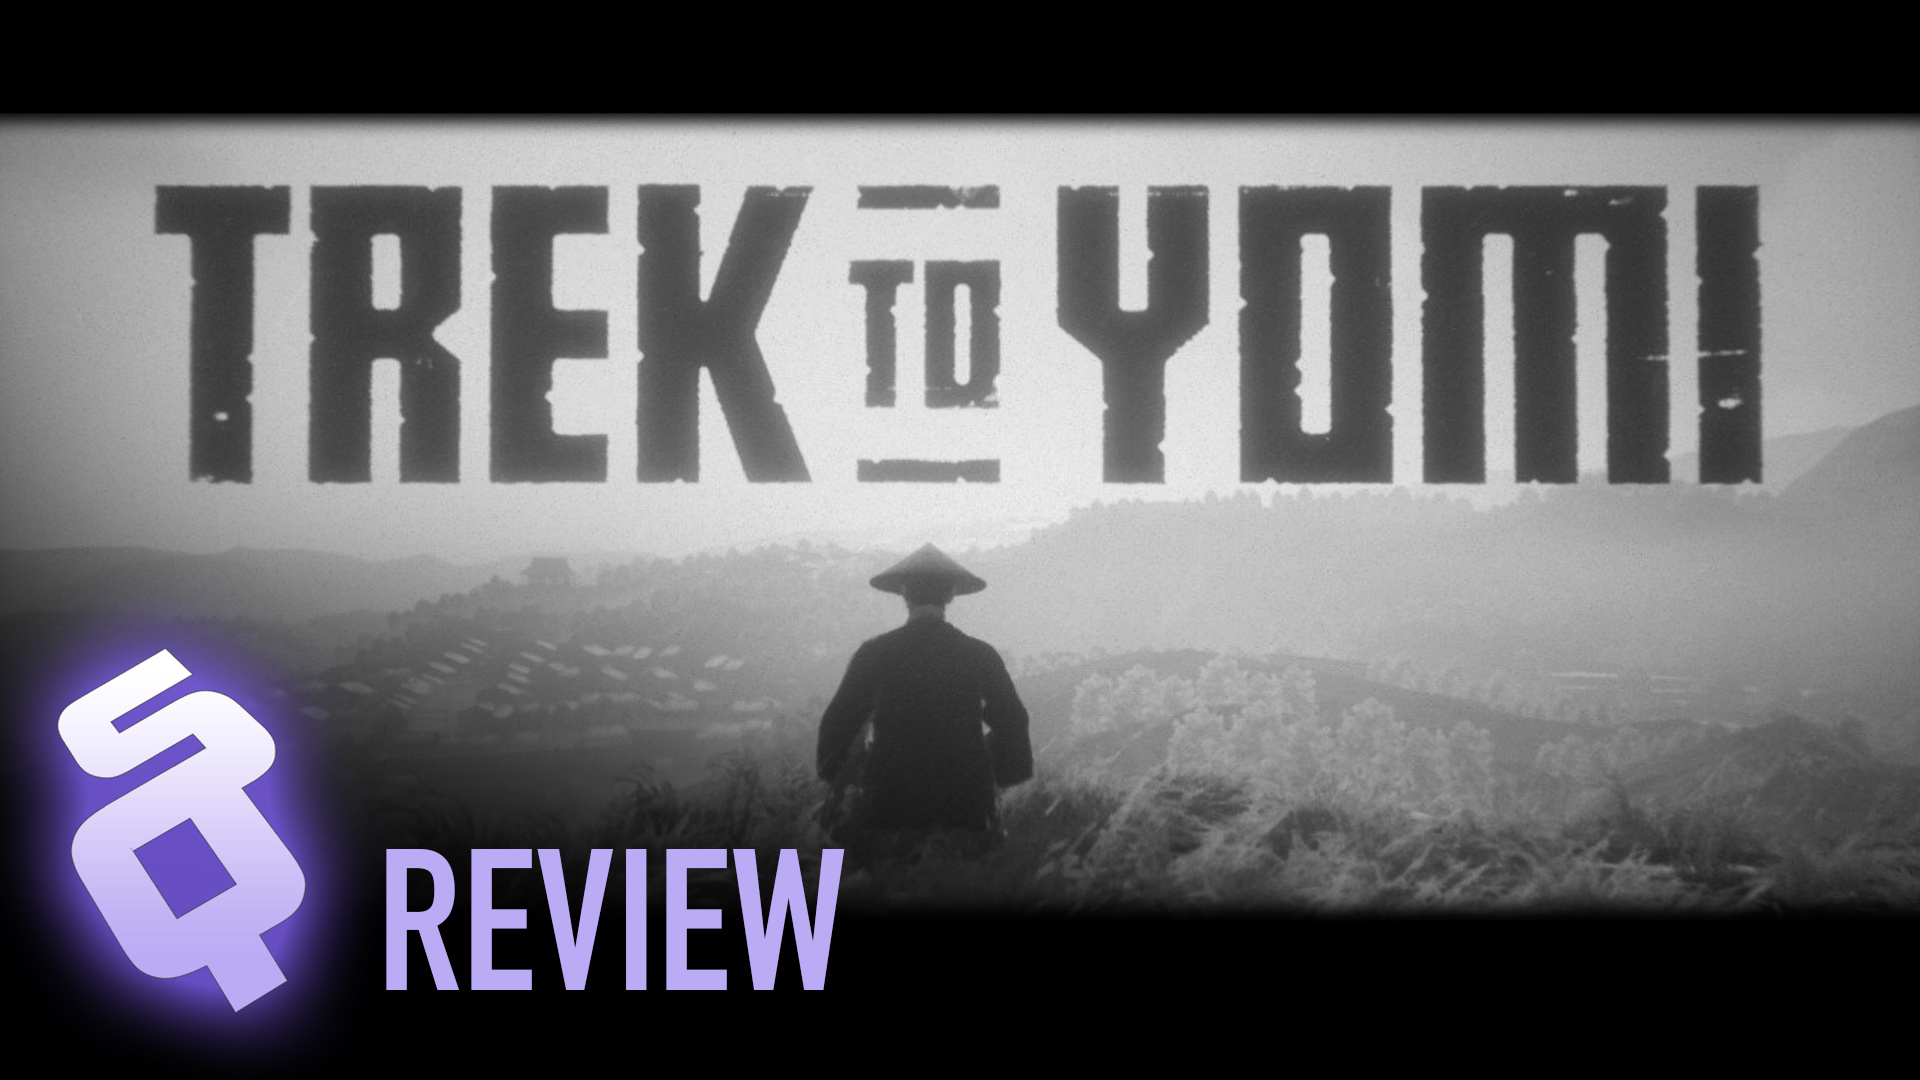 Review: Trek to Yomi is a worthwhile voyage